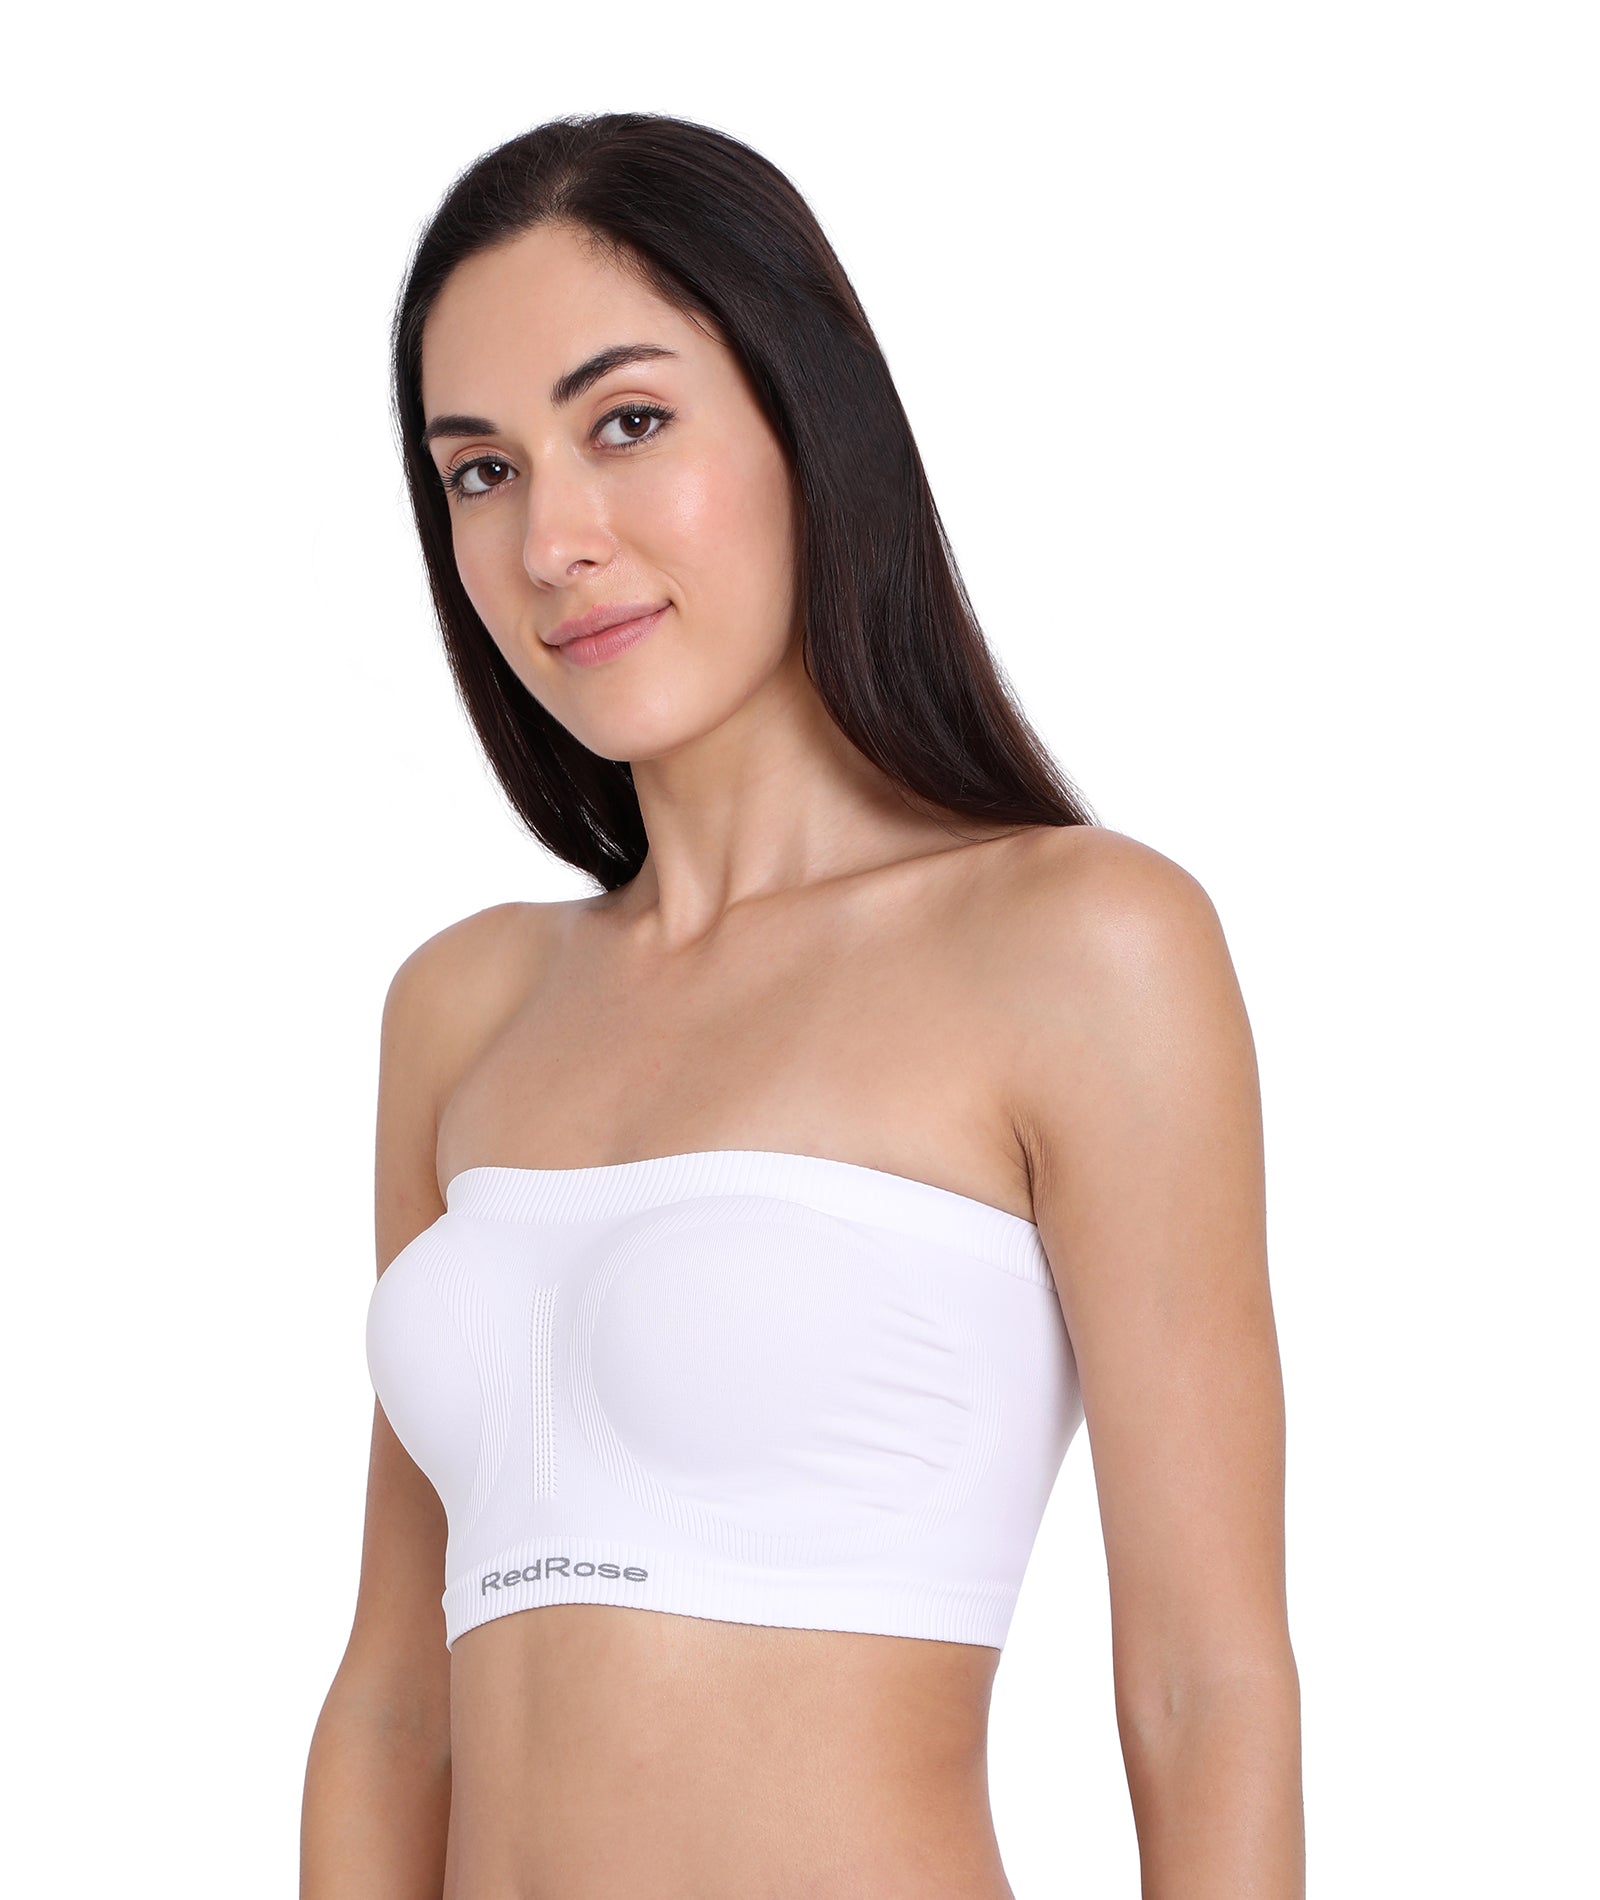 Red Rose Women's Non-Padded | Non-Wired | Seamless | Strapless Top Tube Bra